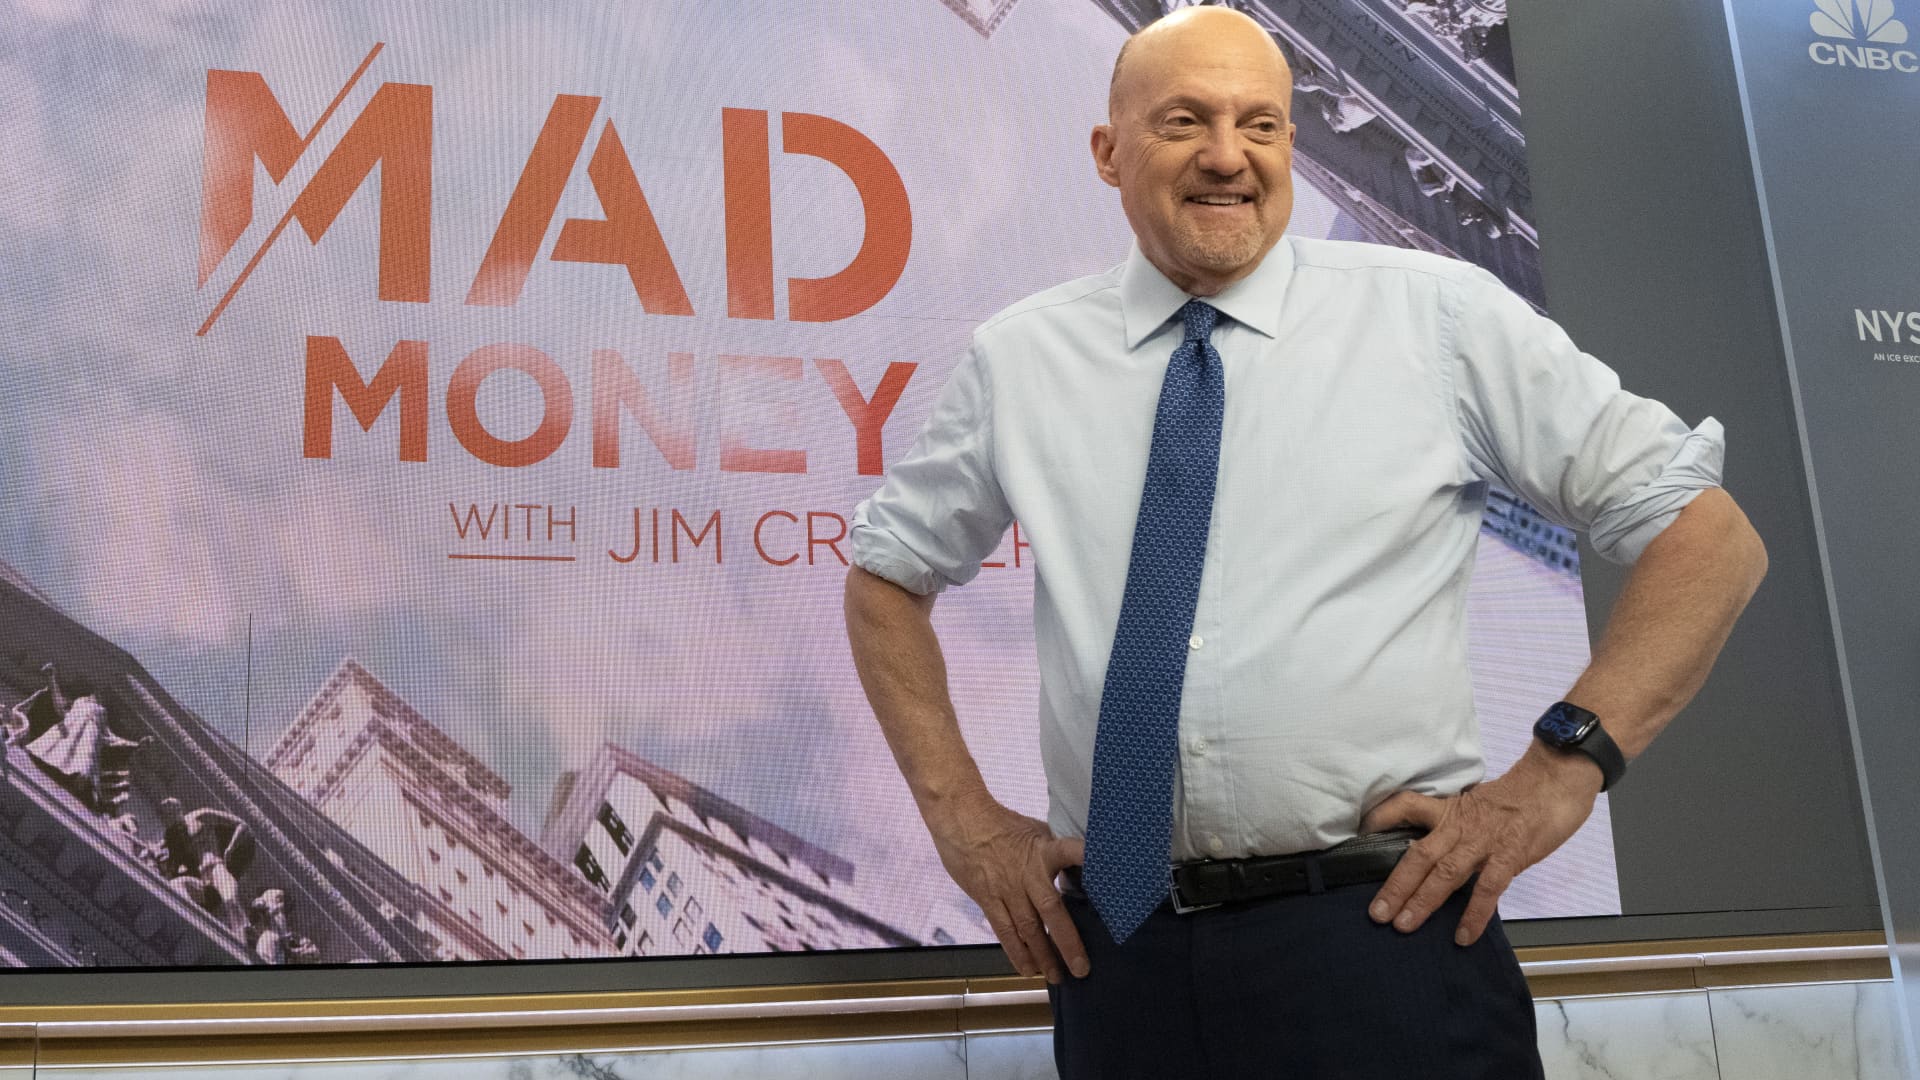 Jim Cramer says the market is ready for a pullback